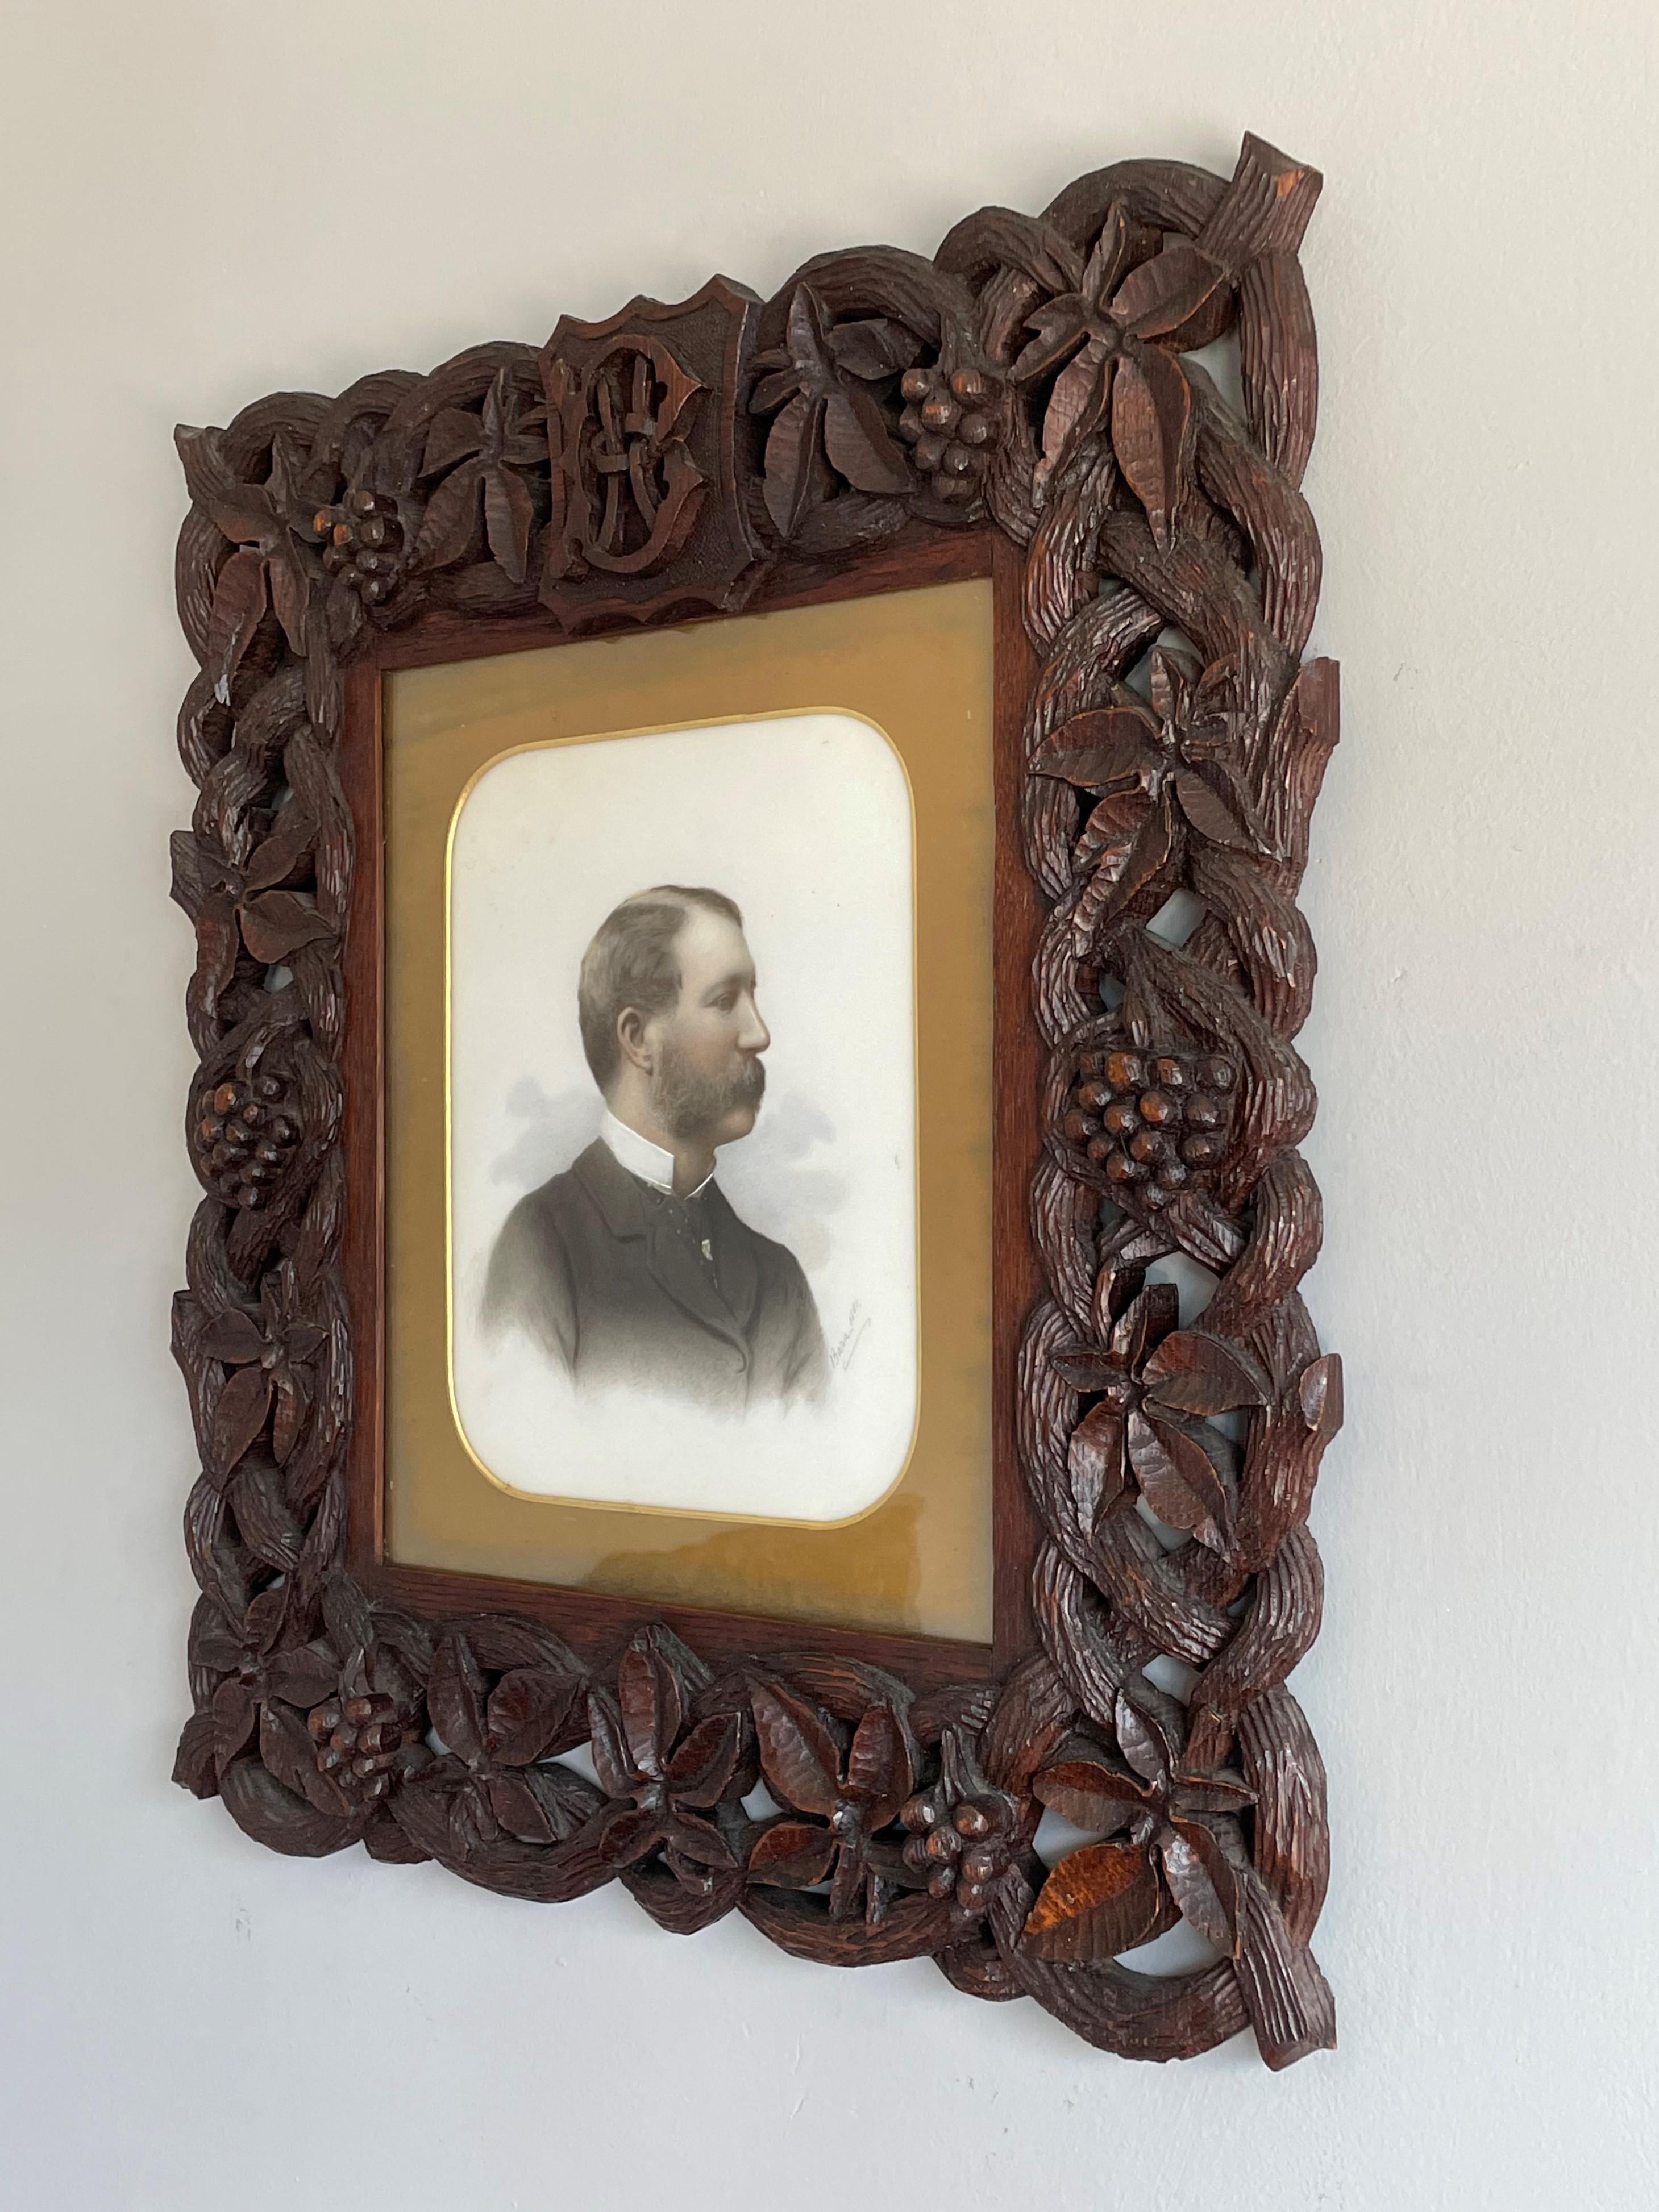 Superb condition, rare pair of hand carved, solid oak frames with stunning grapevines all around.

If you are appreciative of rare and sculptural antiques then this Swiss Black Forest pair of frames could be exactly what you are looking for. The